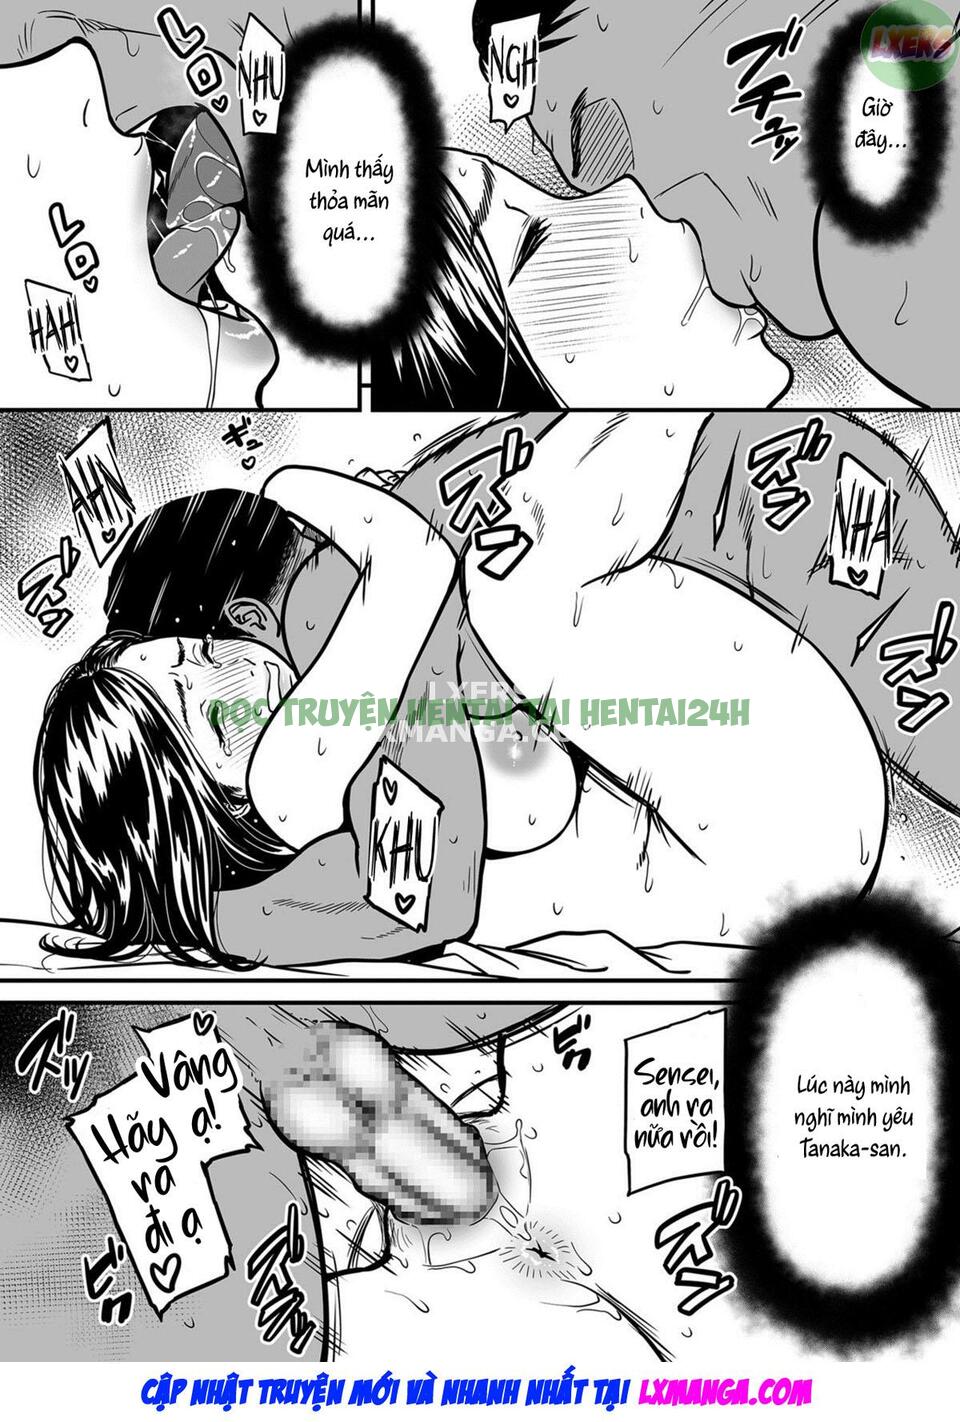 Xem ảnh It’s Not A Fantasy That The Female Erotic Mangaka Is A Pervert - Chapter 7 END - 22 - Hentai24h.Tv